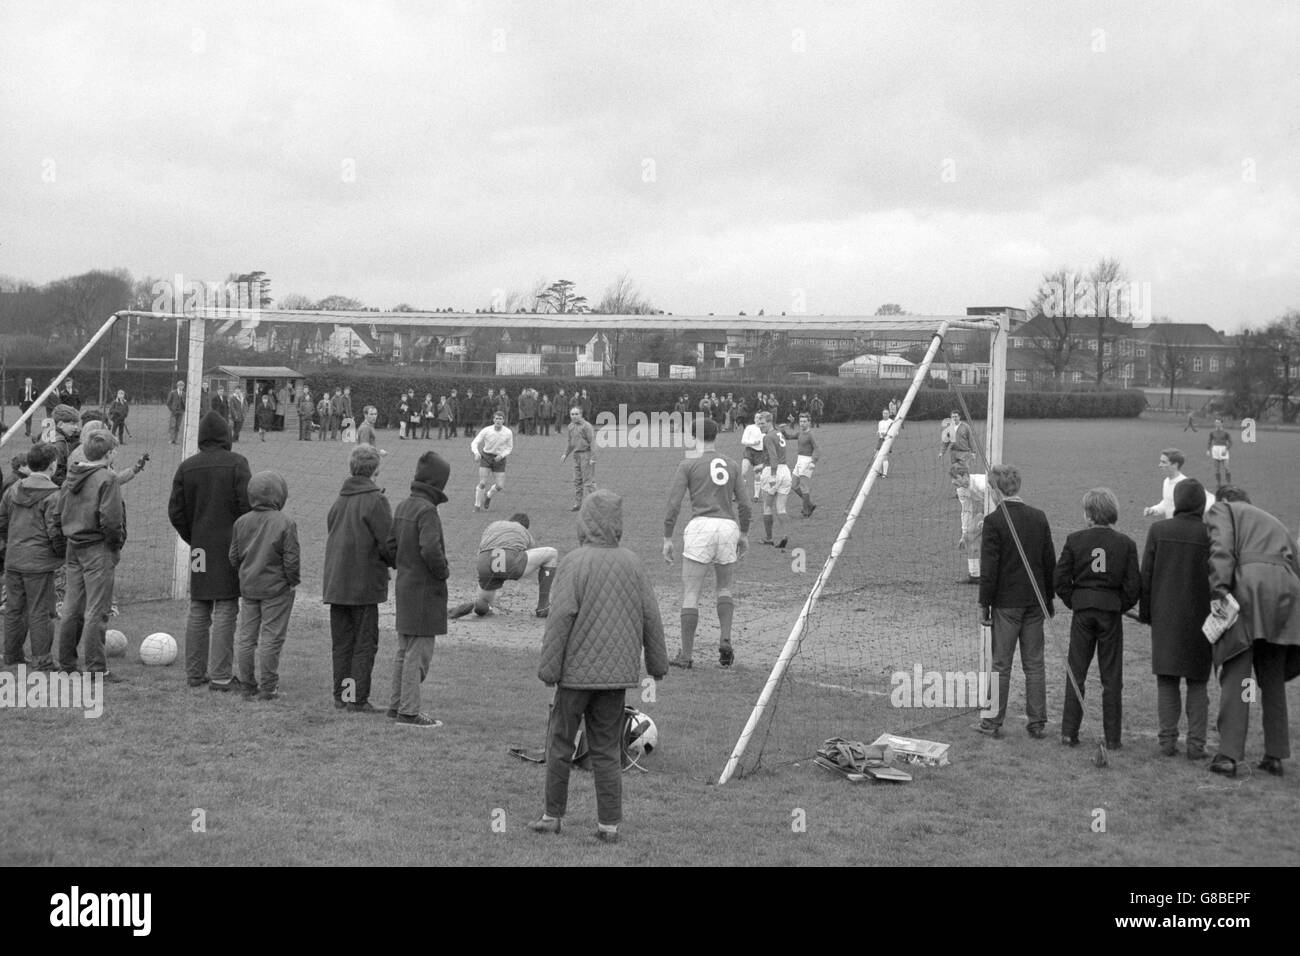 Schoolboys look on as members of the England football team train at the Bank of England Sports Ground in Roehampton. They are preparing for the international match against West Germany at Wembley. Stock Photo